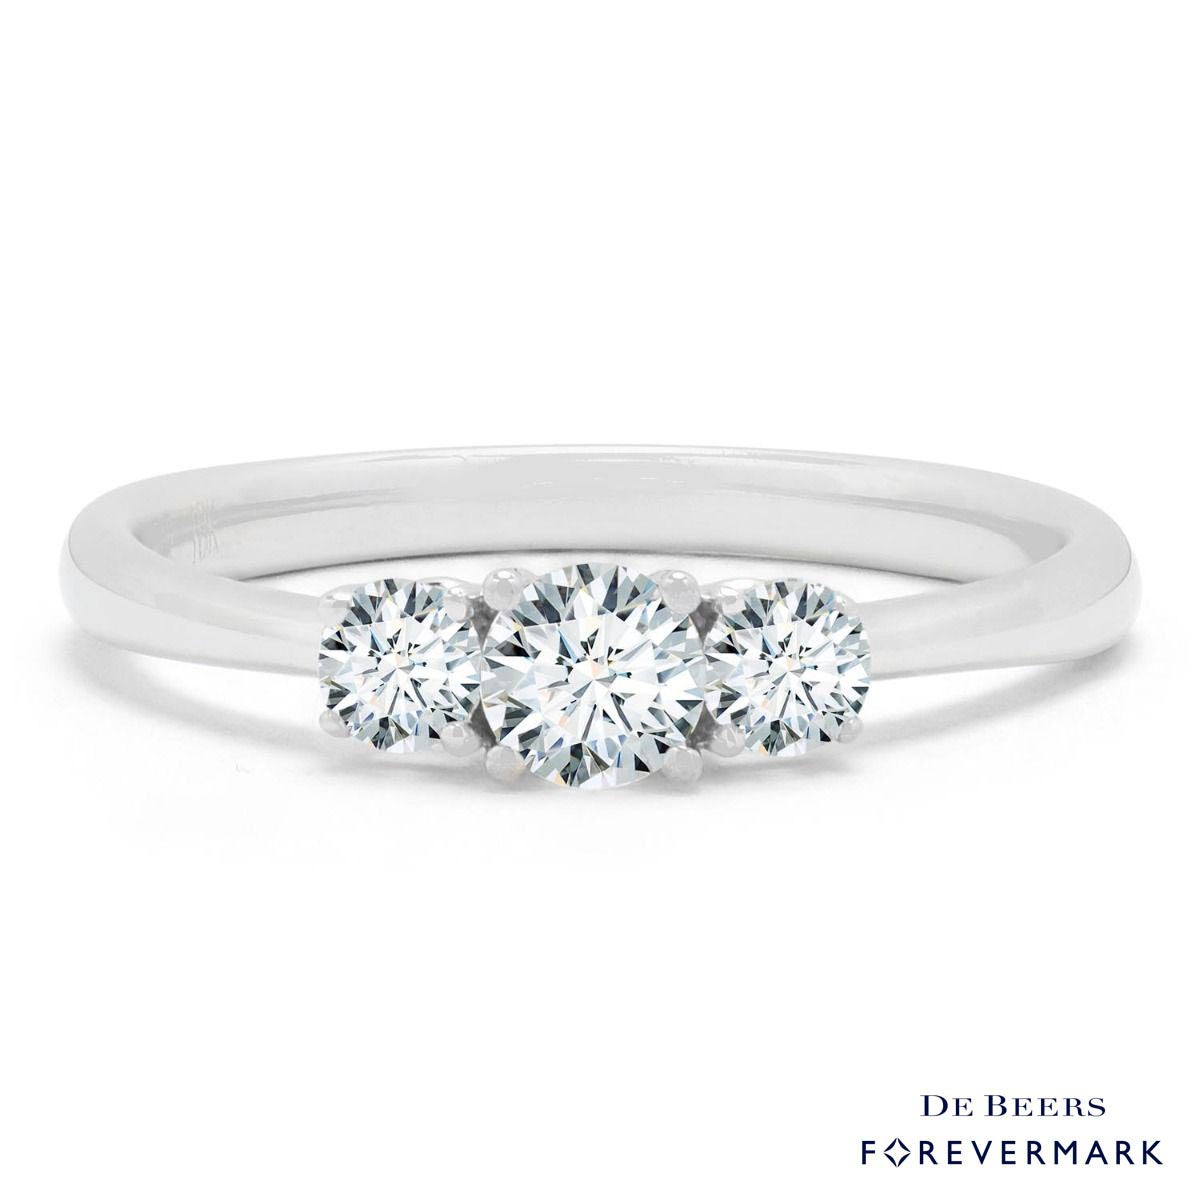 De Beers Forevermark Diamond Three Stone Ring in 18kt White Gold (1/2ct tw)